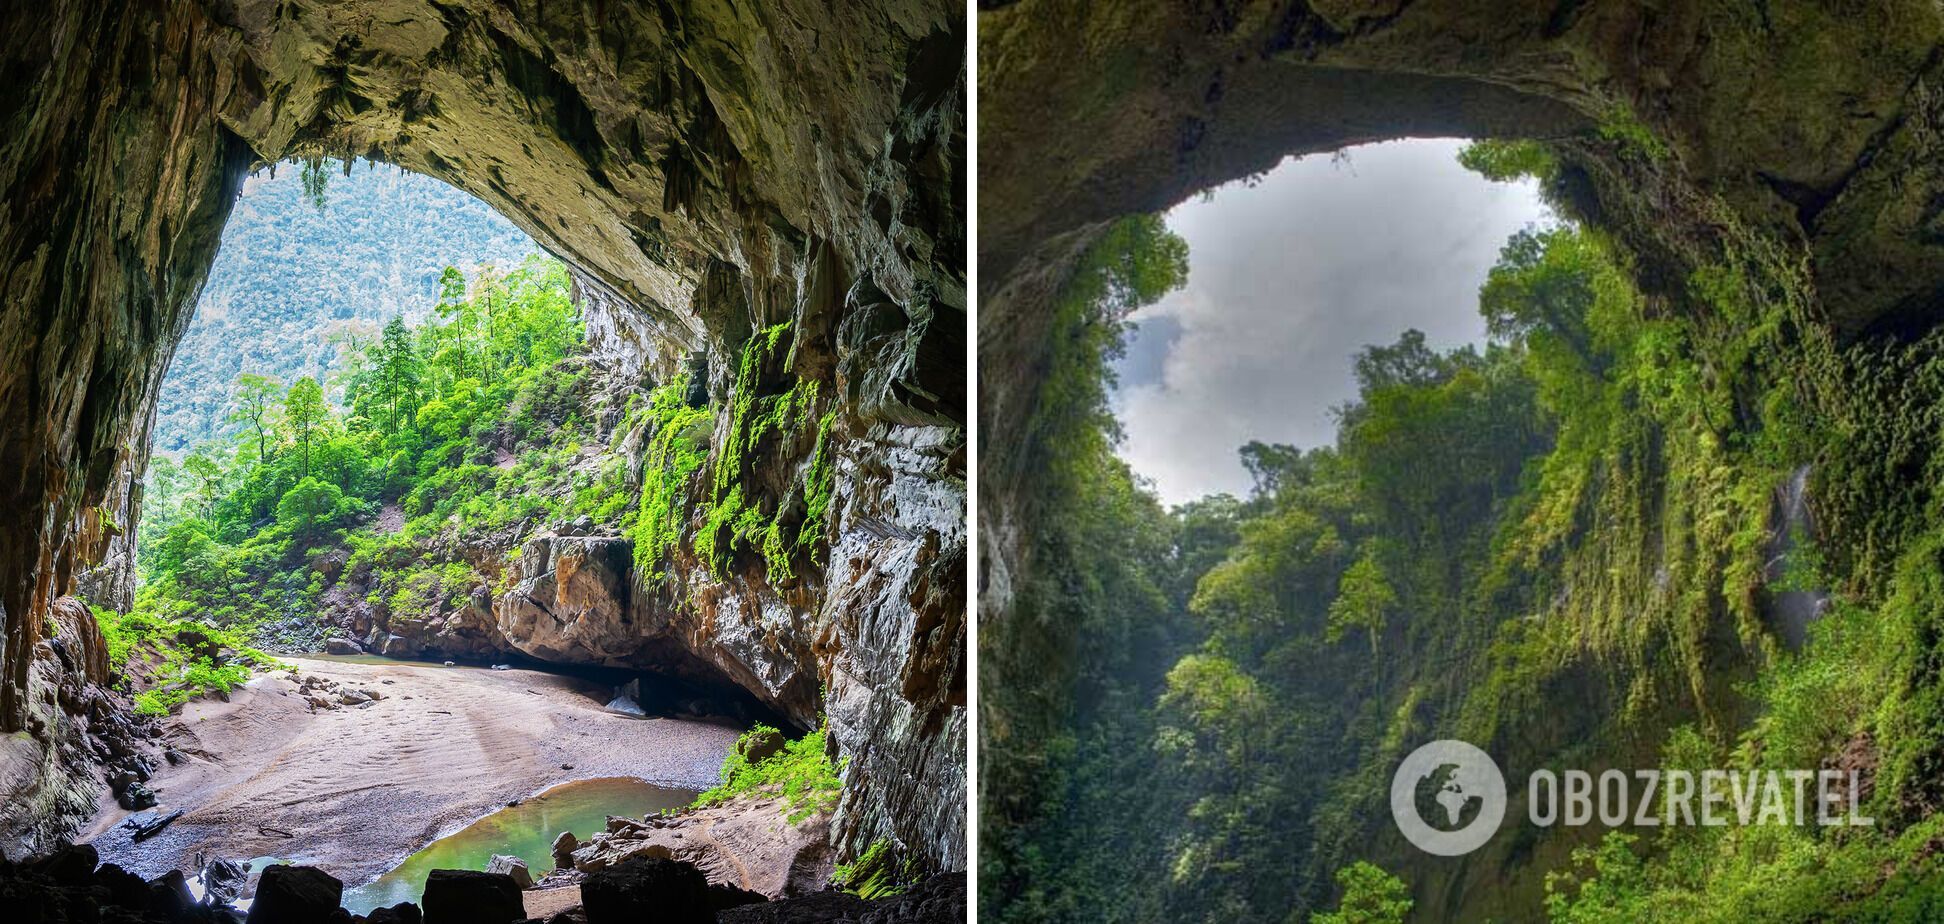 There's a cave in Vietnam that no one has explored in its entirety.